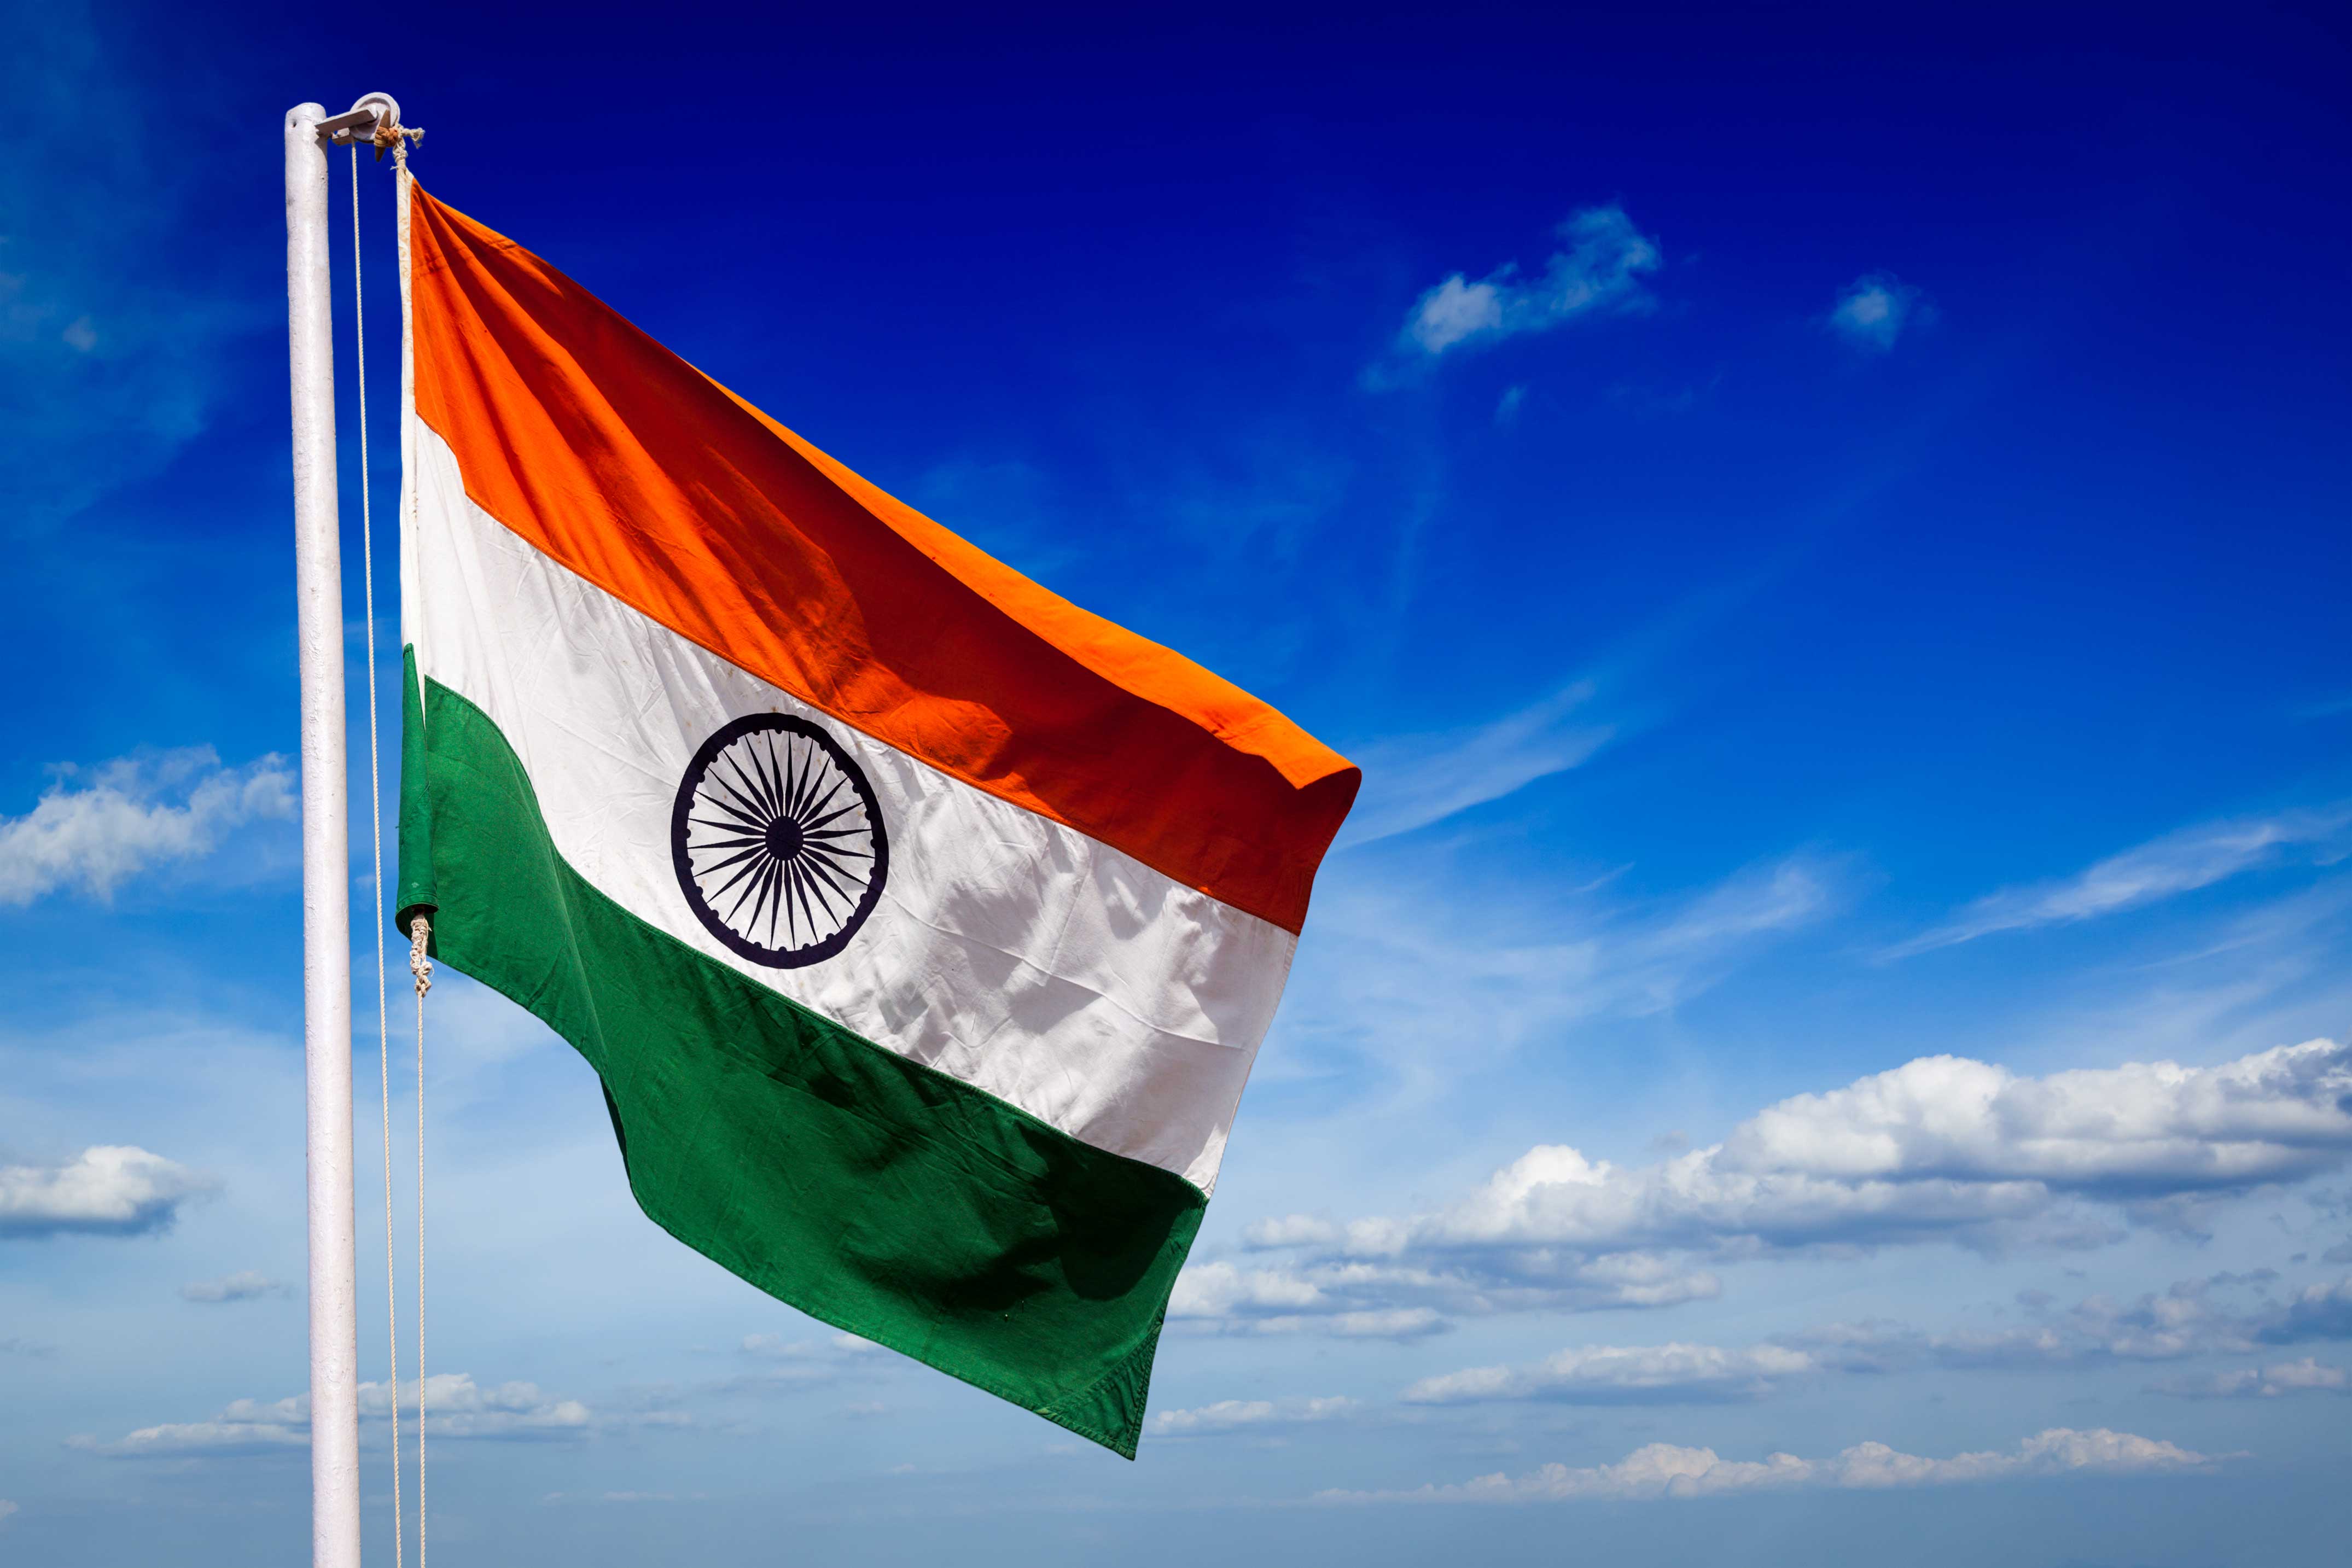 independence day in Goa - 15 august in goa - india flag - flag hoisting in goa - india flag hosting - india tri colou - goa - events in goa - public holidays in goa